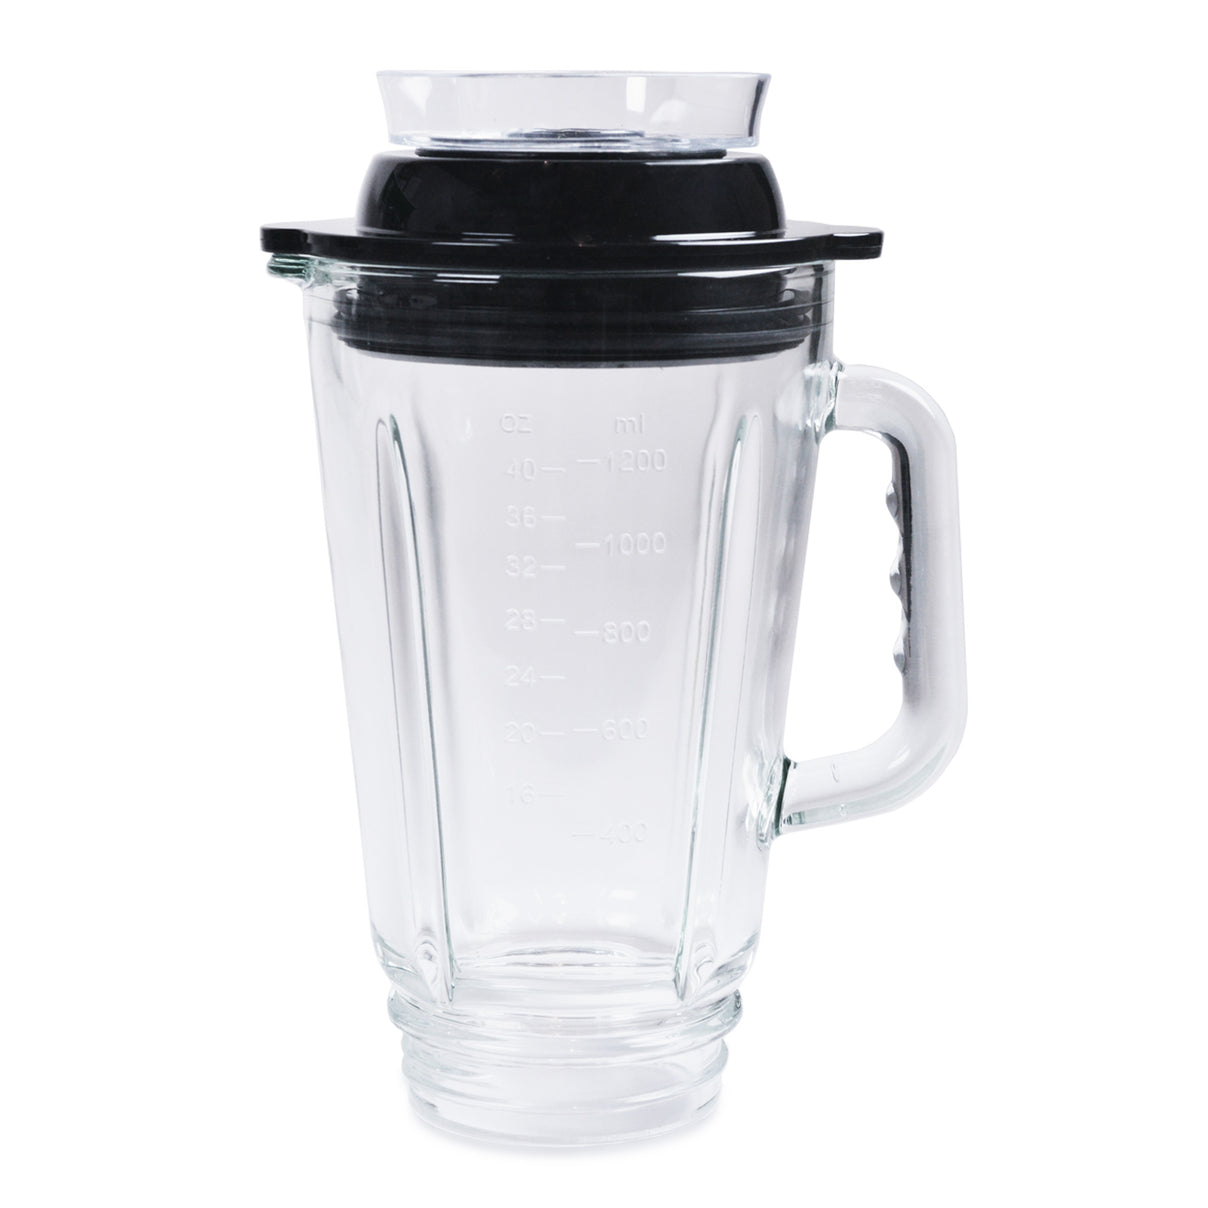 This is the 42 oz glass blending container with vacuum lid for the Glass Personal Blender®. You can use the Tribest® Vacuum Pump (TVP-1050) in conjunction with this to turn your Glass Personal Blender® into a vacuum blender.